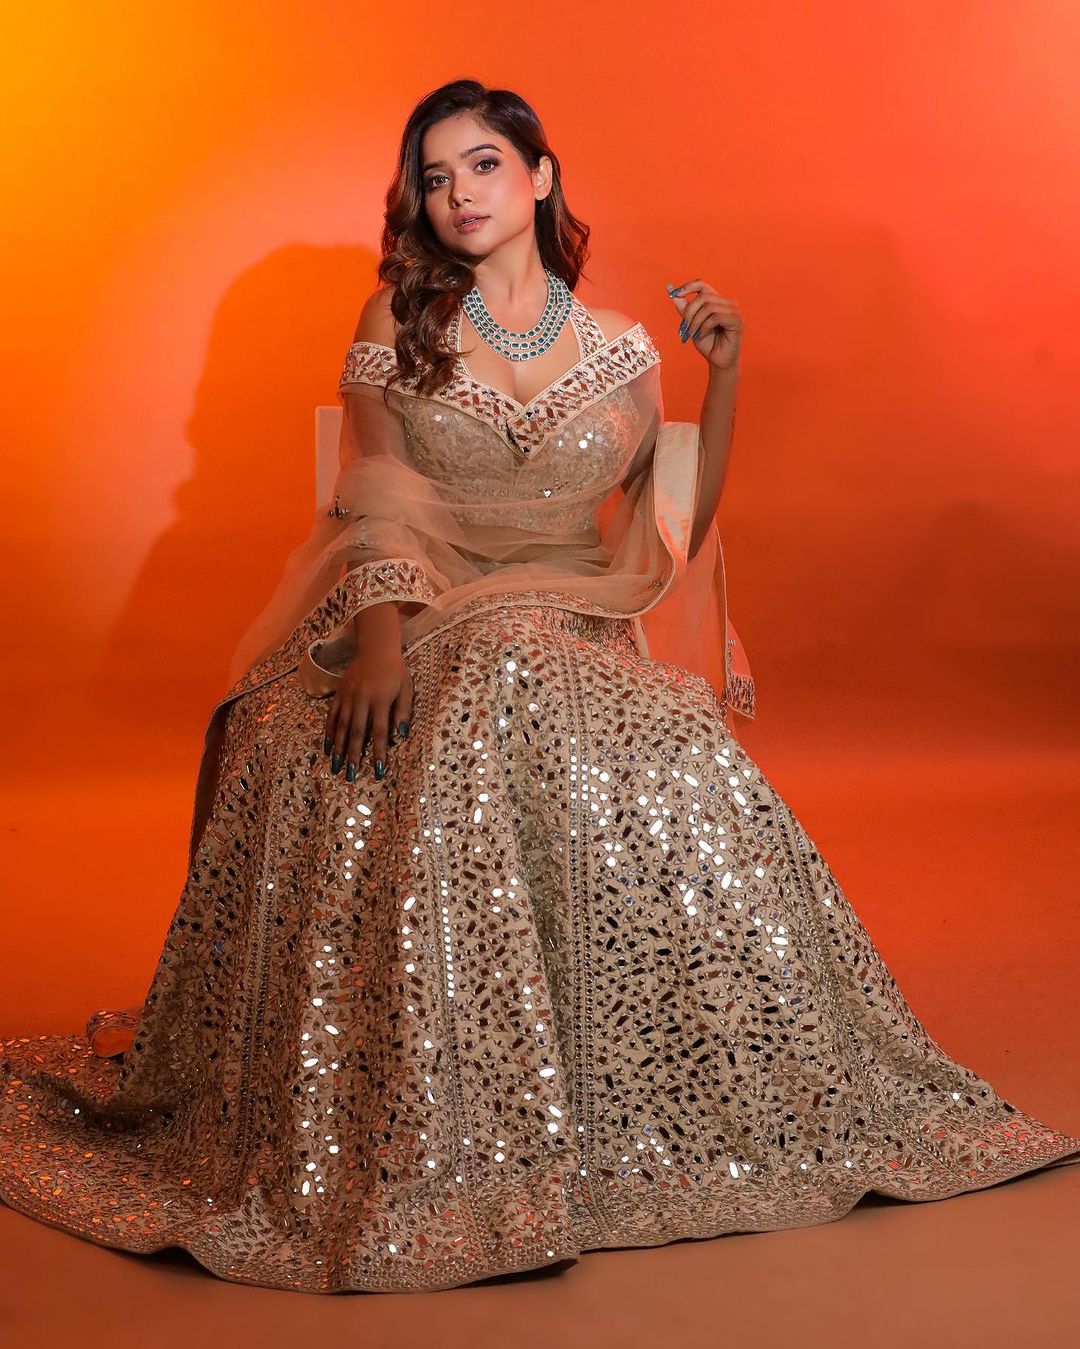 We Bet You Can't Take Your Eyes Off Manisha Rani in This Dreamy Lehenga